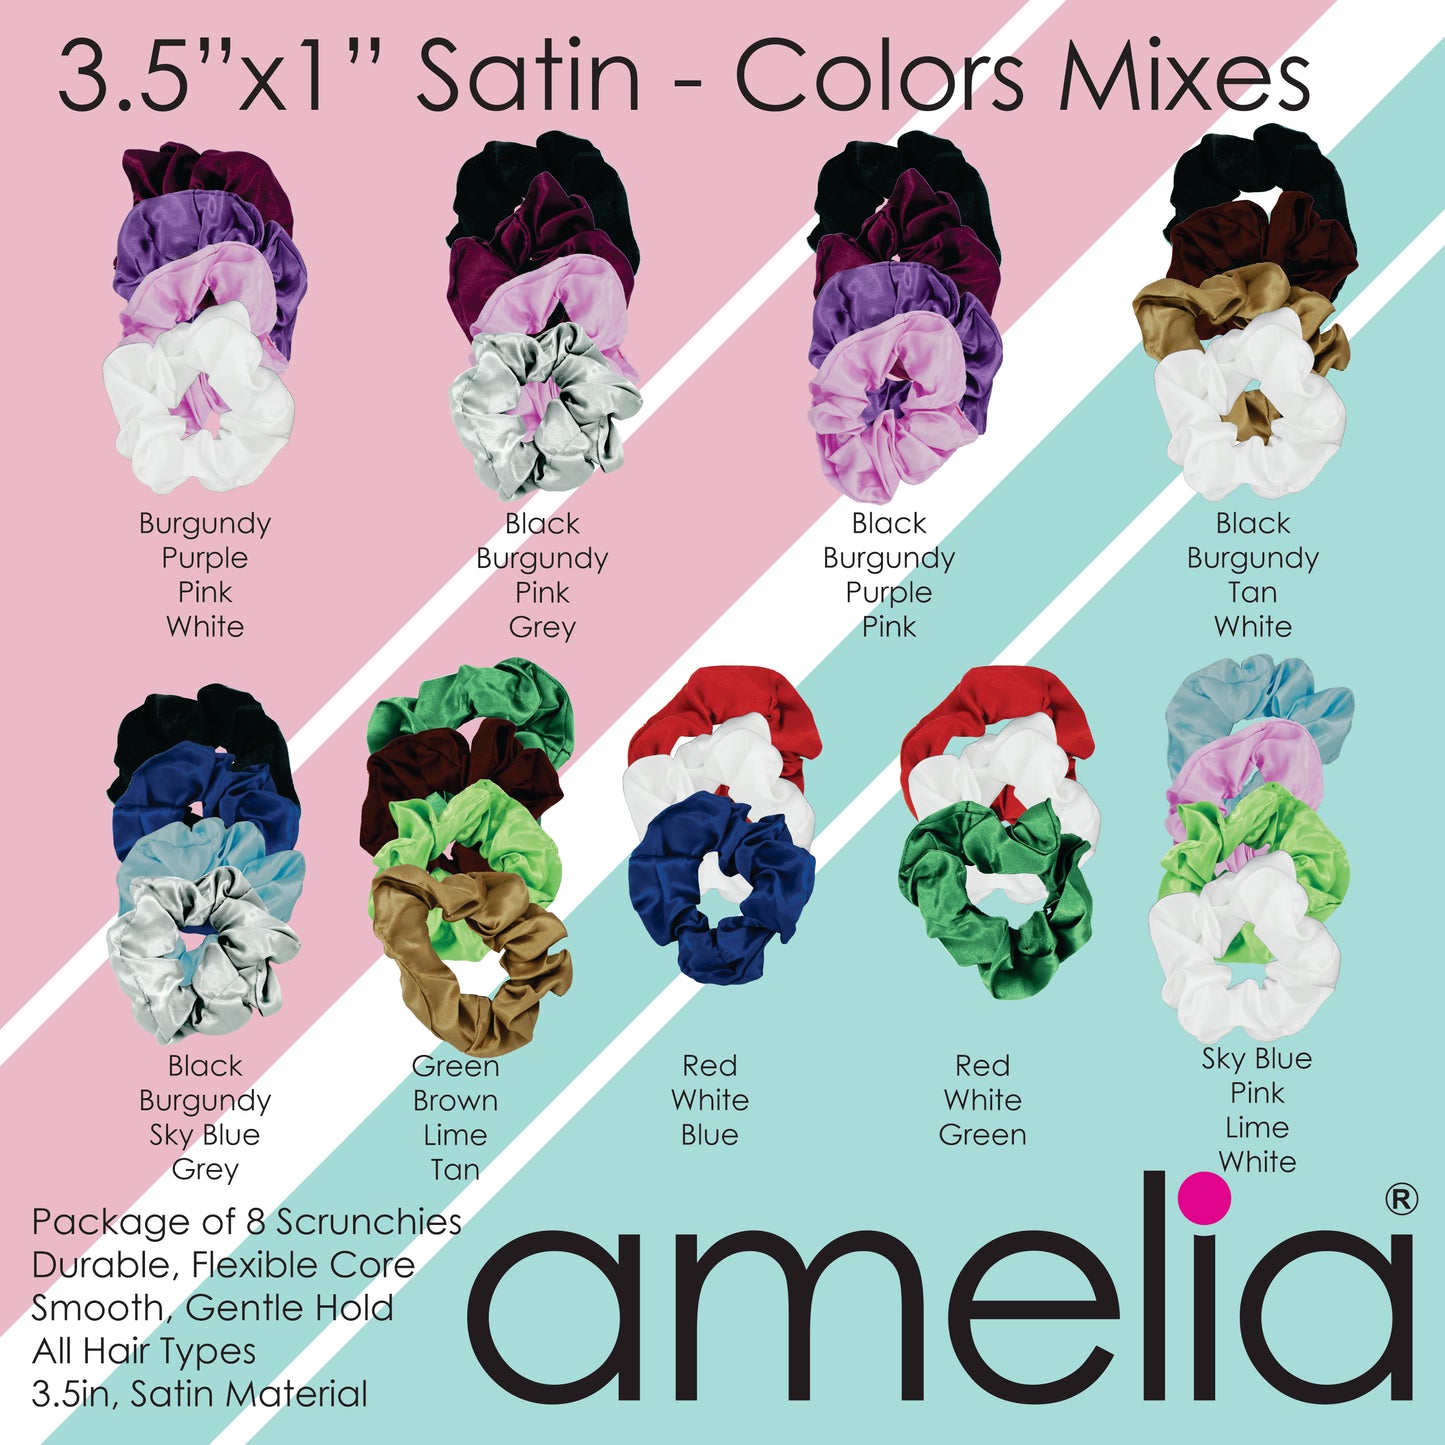 Amelia Beauty Products, Black, Burgundy, Purple and Pink Satin Scrunchies, 3.5in Diameter, Gentle on Hair, Strong Hold, No Snag, No Dents or Creases. 8 Pack